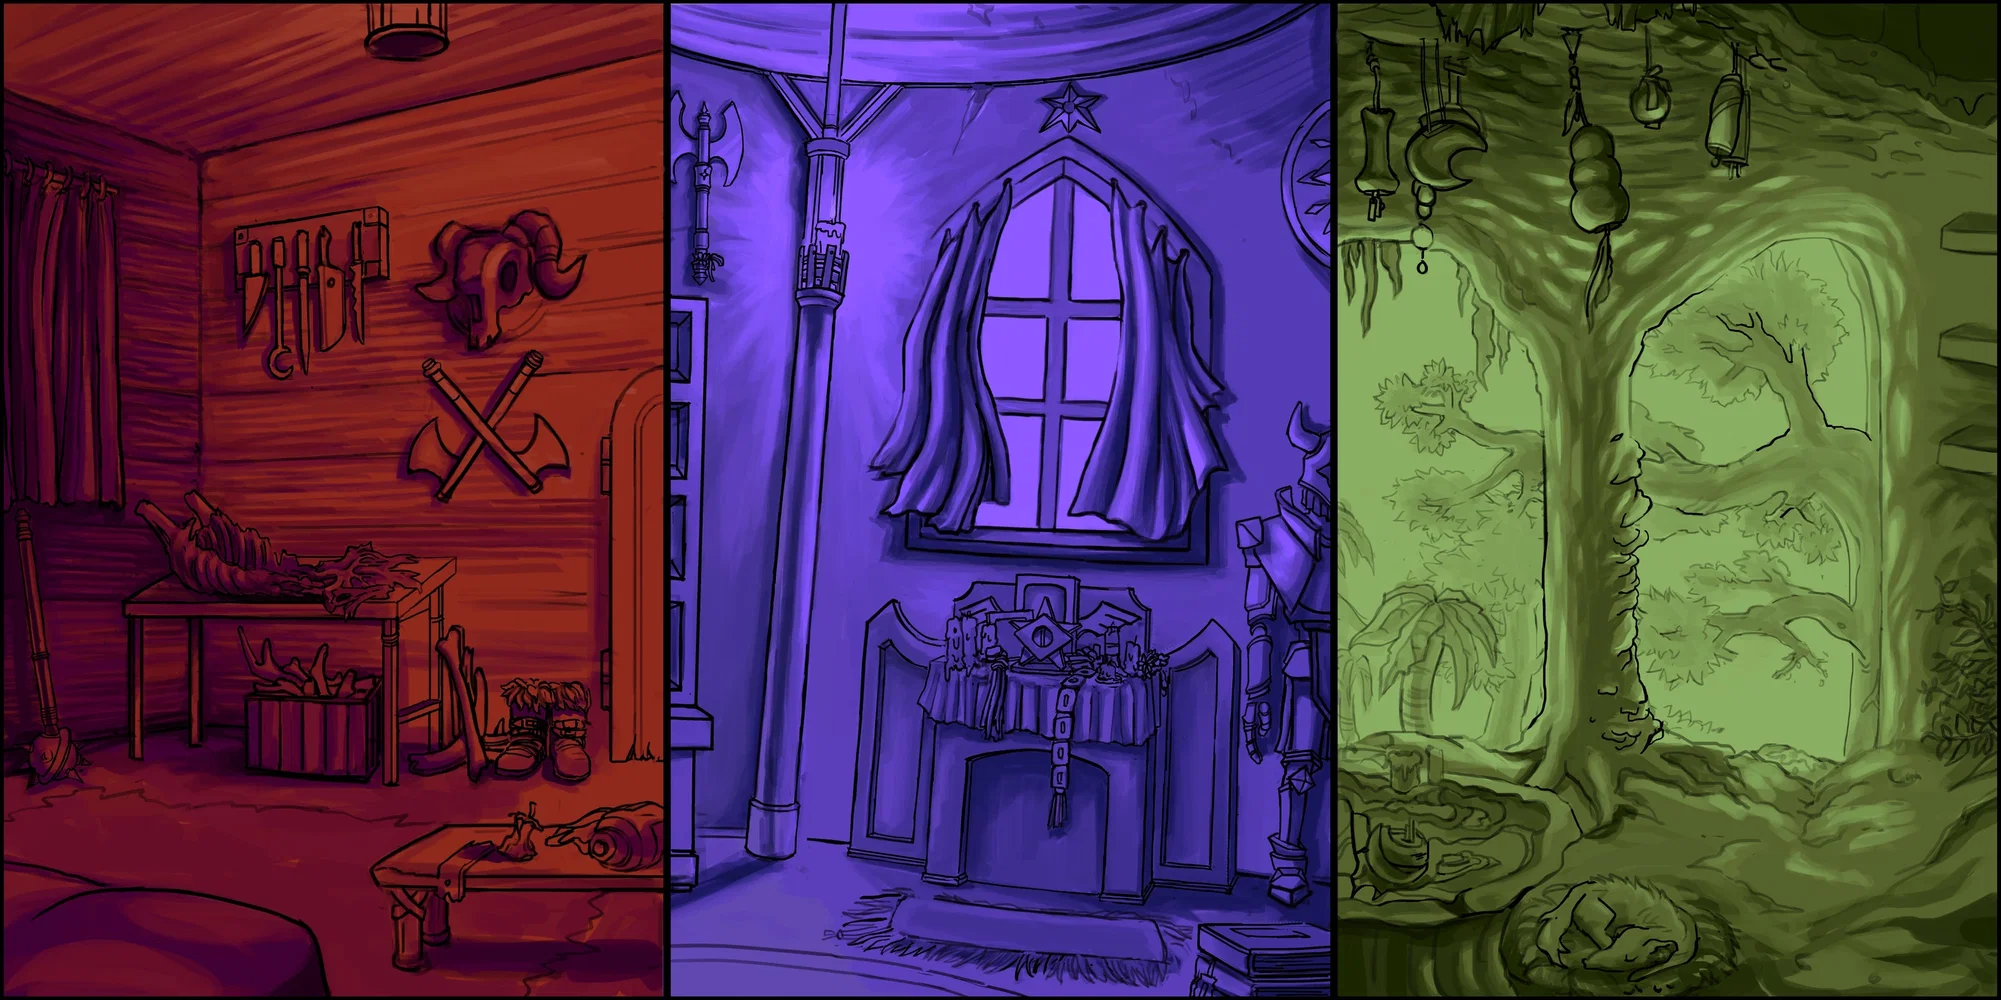 A triptych of interior environments. Each one is in monochrome red, purple and green respectively. The first is a cabin with axes, butcher knives and an animal carcass laid out on a table. The second is a circular room with a large window, an altar, and a suit of armor. The third is a room with dirt walls containing plants and organic material. A forest is visible outside of the room.